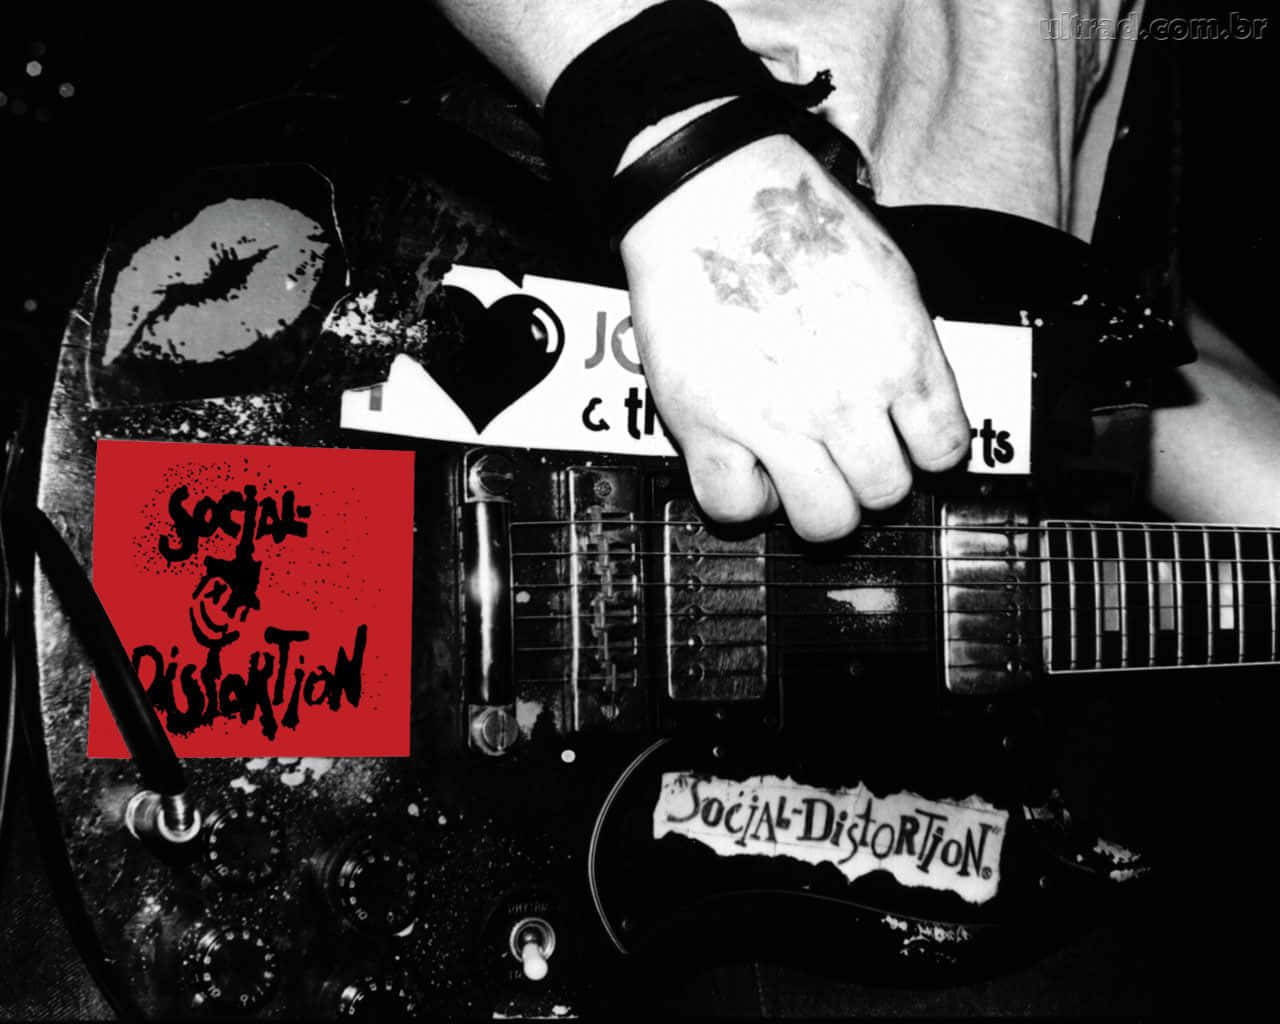 Power Of Punk - A Glimpse Into A Social Distortion Concert